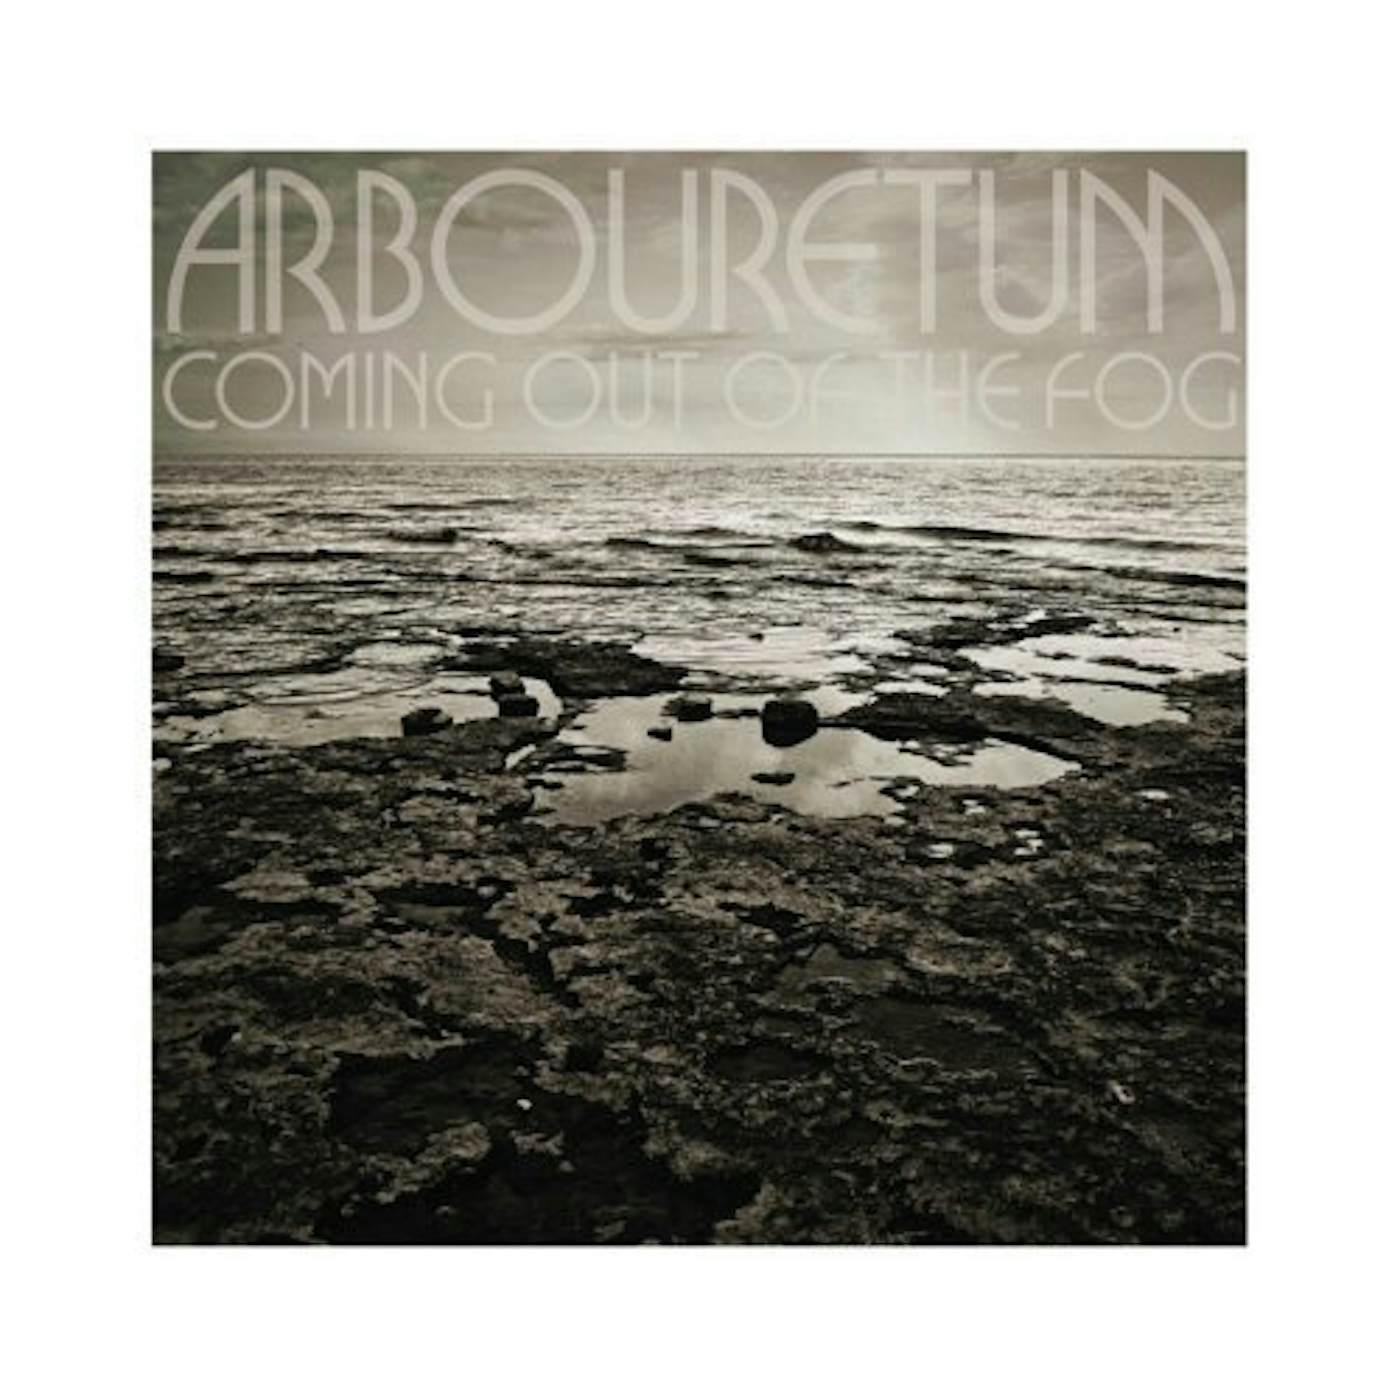 Arbouretum COMING OUT OF THE FOG CD